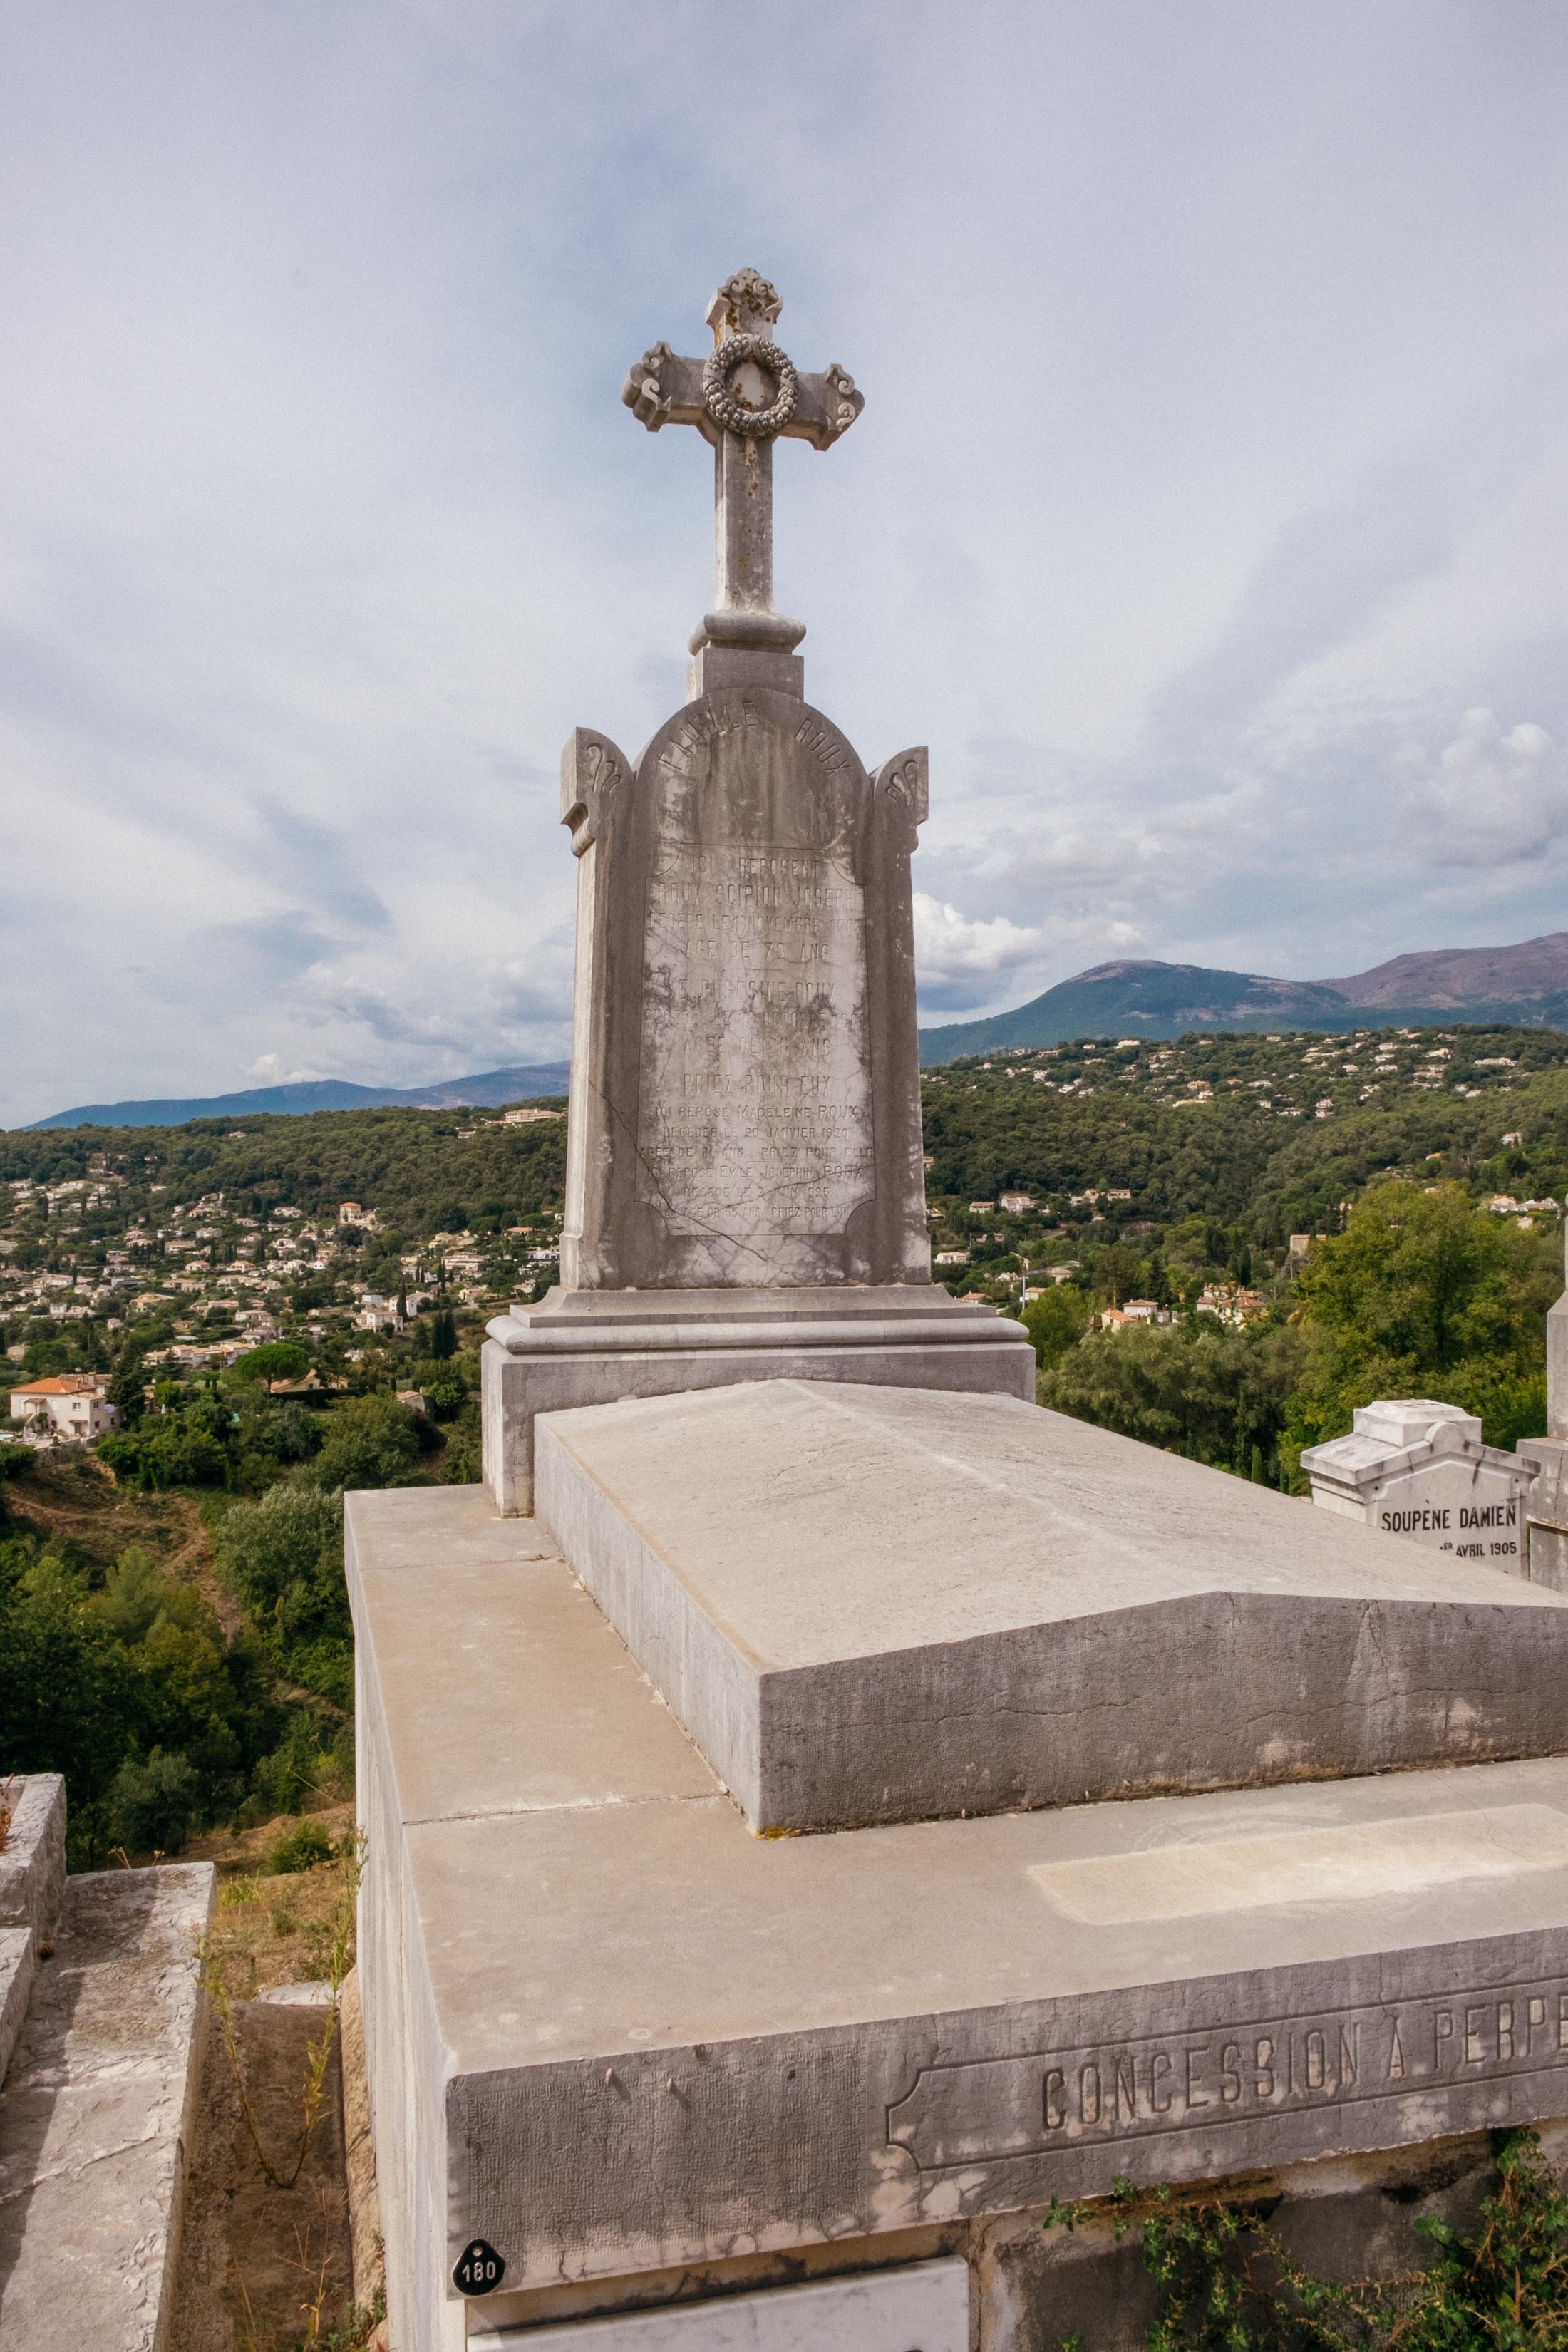 Tomb and view from the Saint Paul de Vence Cemetery